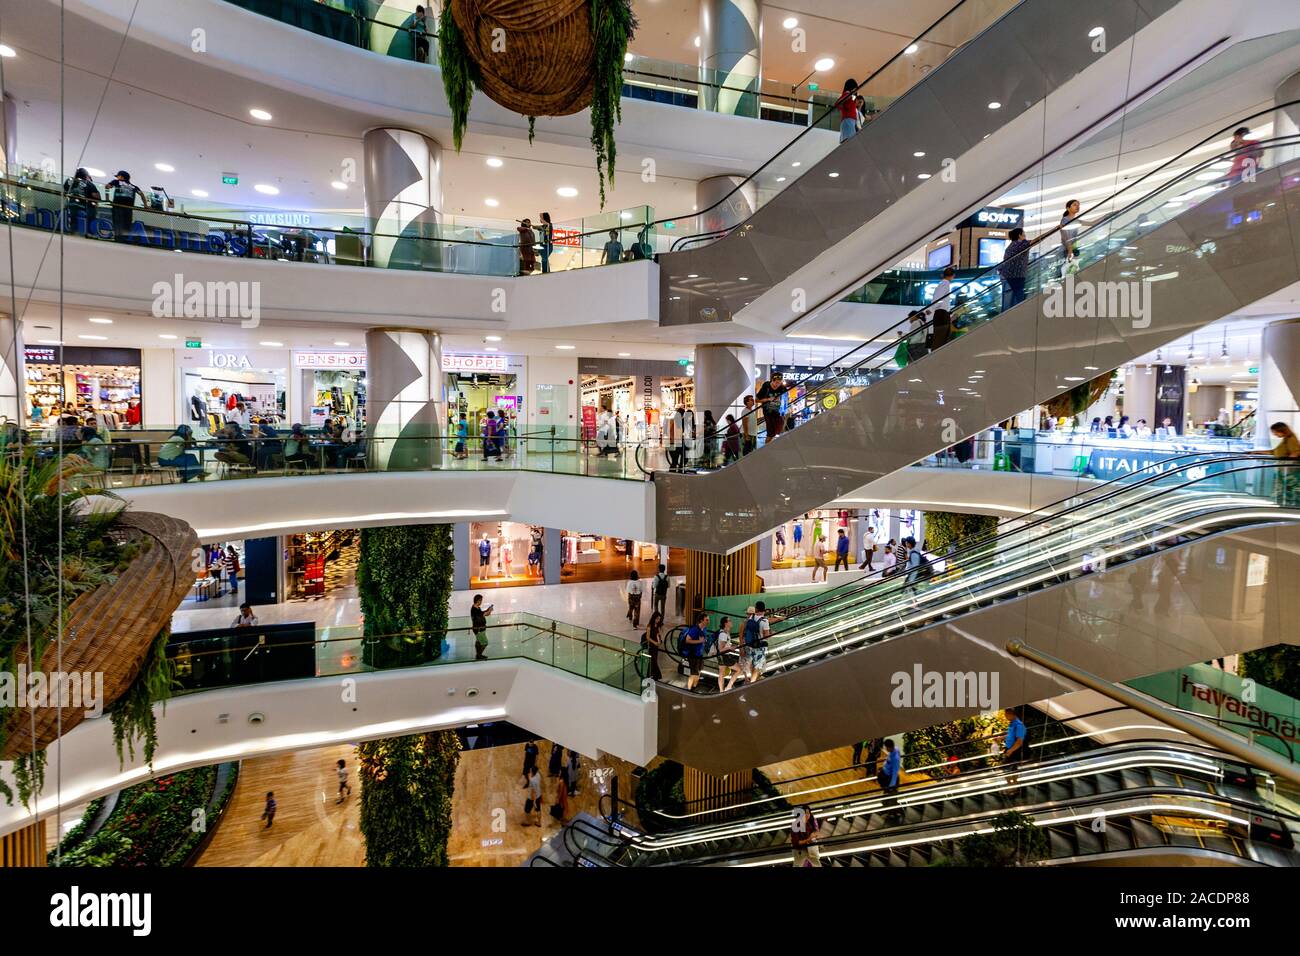 Wealthy Shoppers High Resolution Stock Photography and Images - Alamy